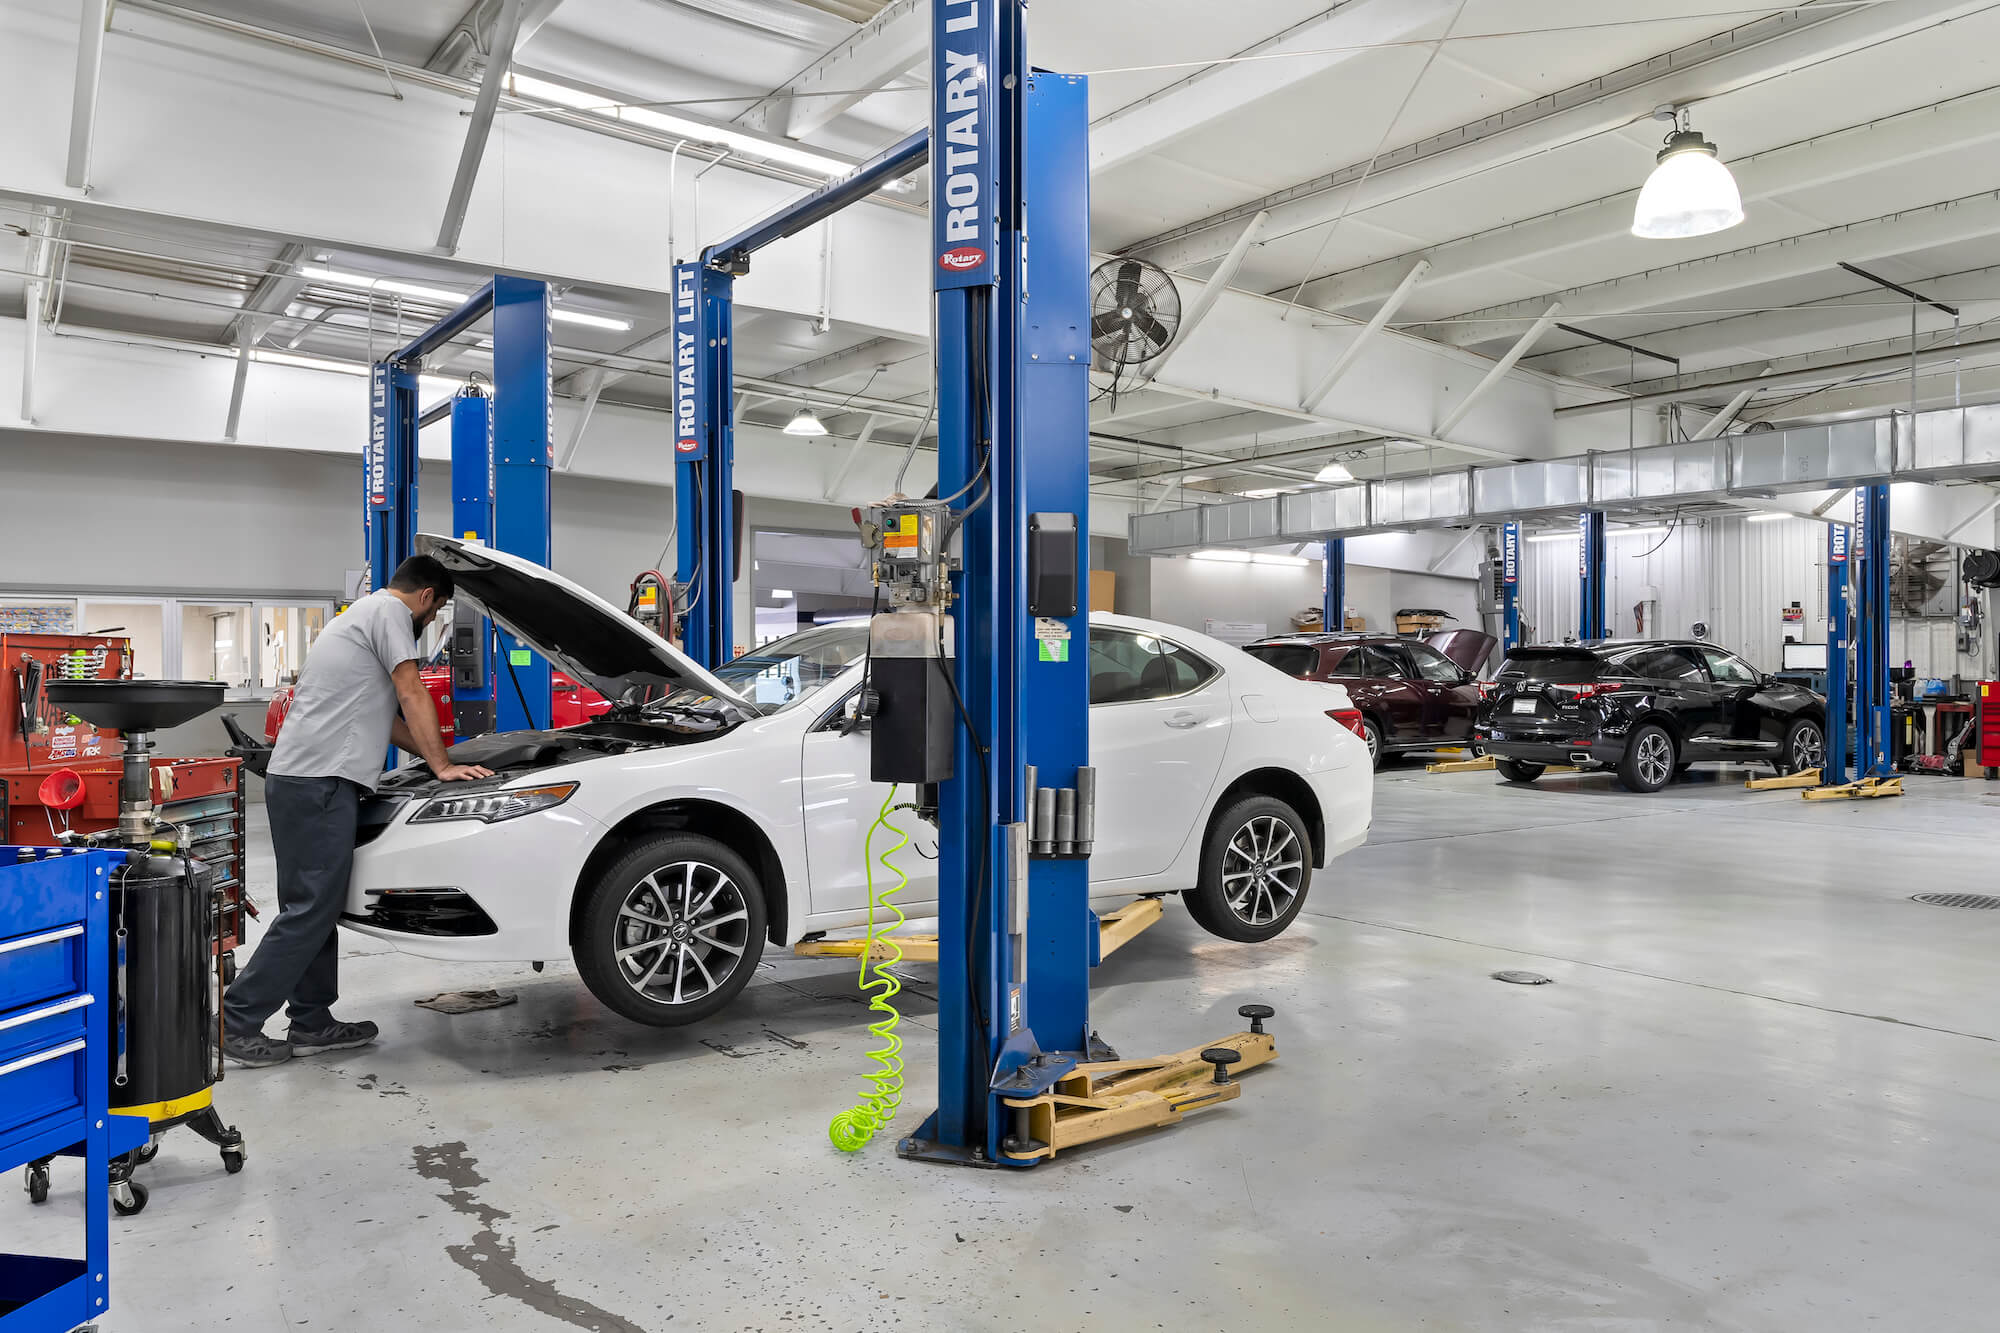 Inside The Fred Anderson Acura Service Center